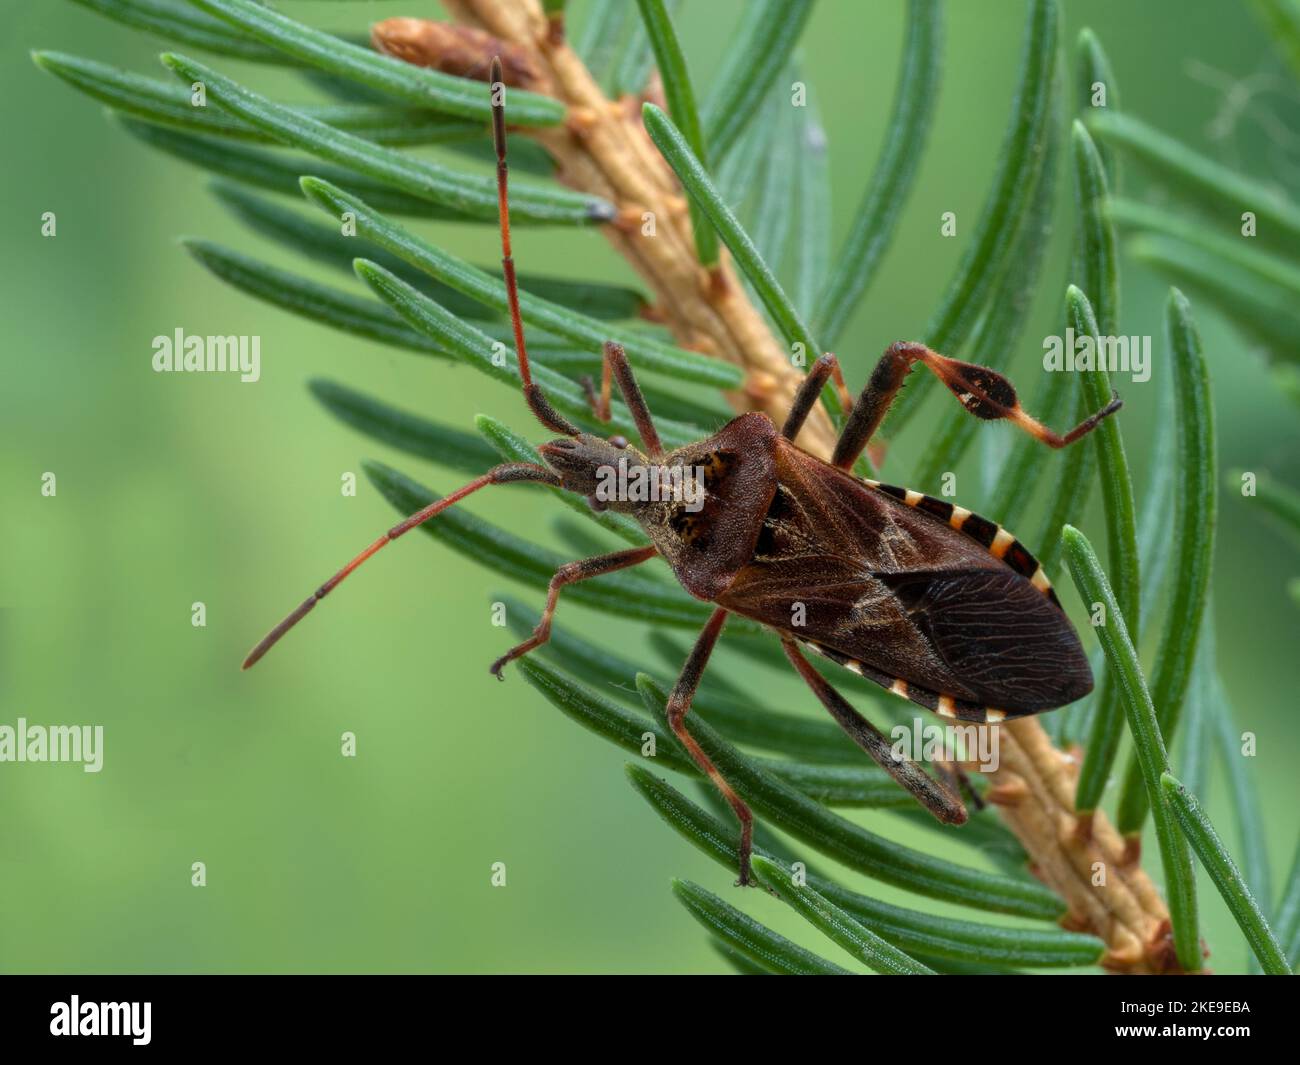 dorsal view of a western conifer seed bug, Leptoglossus occidentalis, crawling amongst the needles of a pine tree Stock Photo